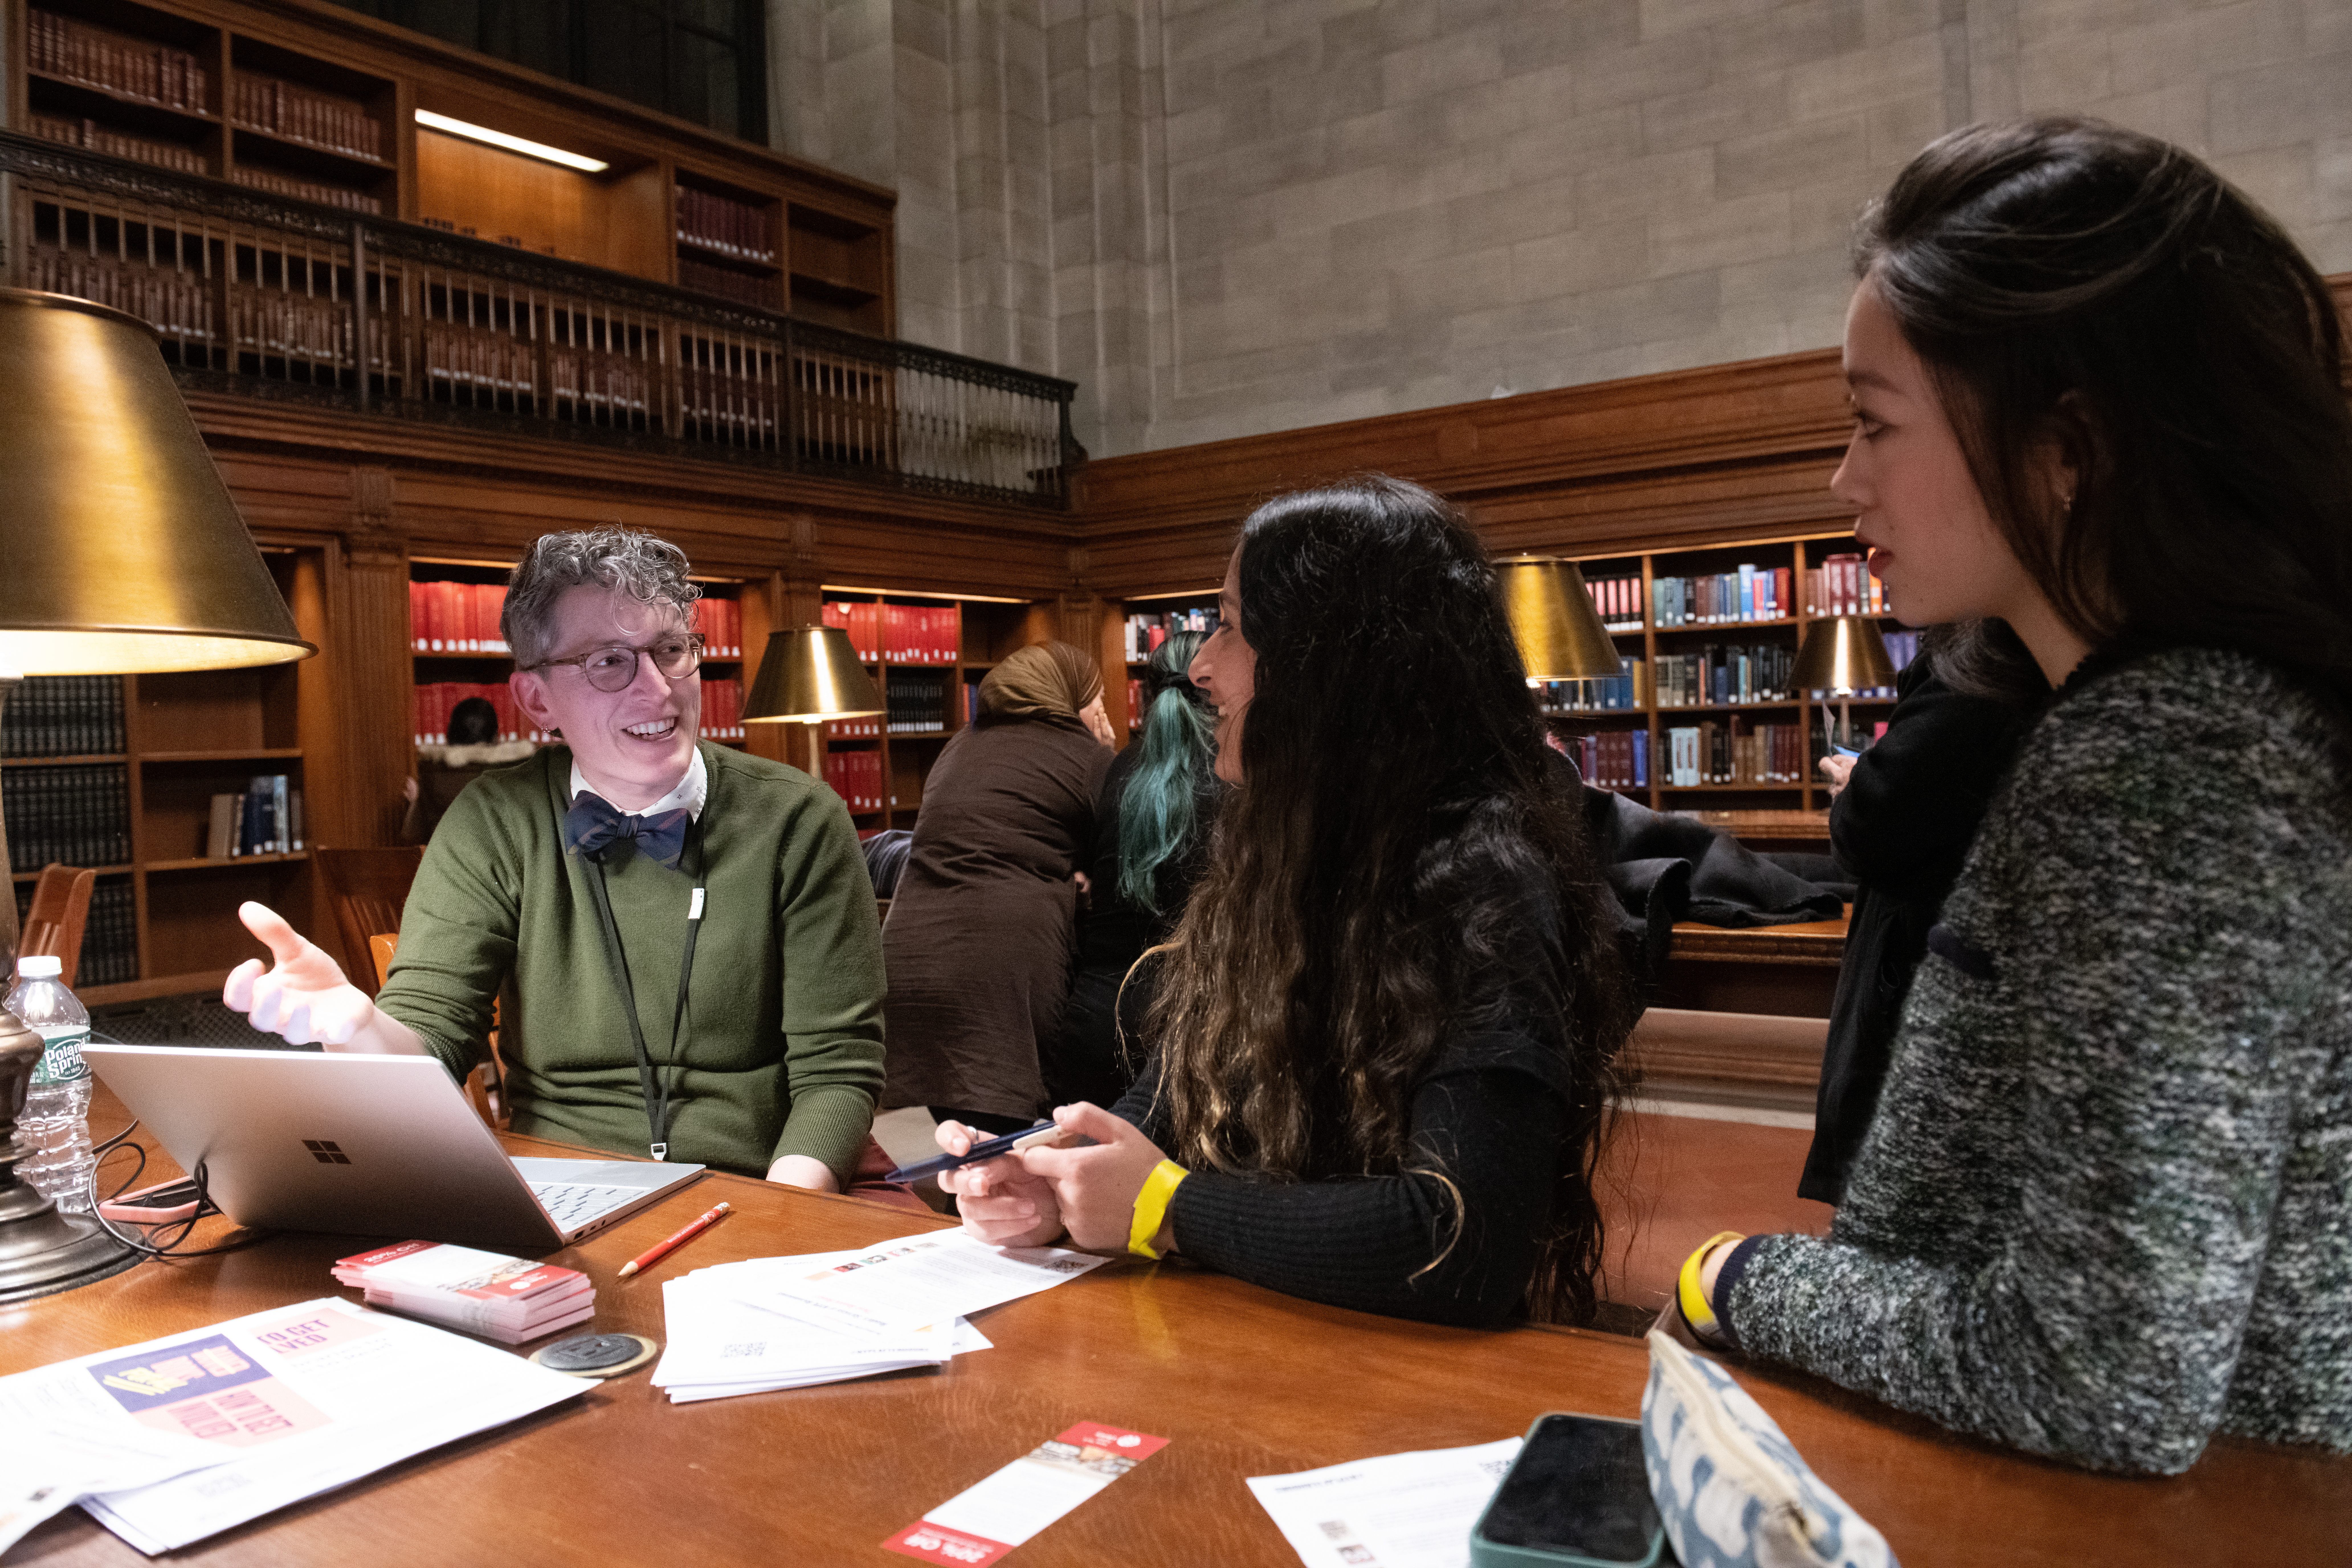 A librarian wearing a green shirt and a bowtie talks to two female patrons in the Rose Reading Room of the New York Public Library